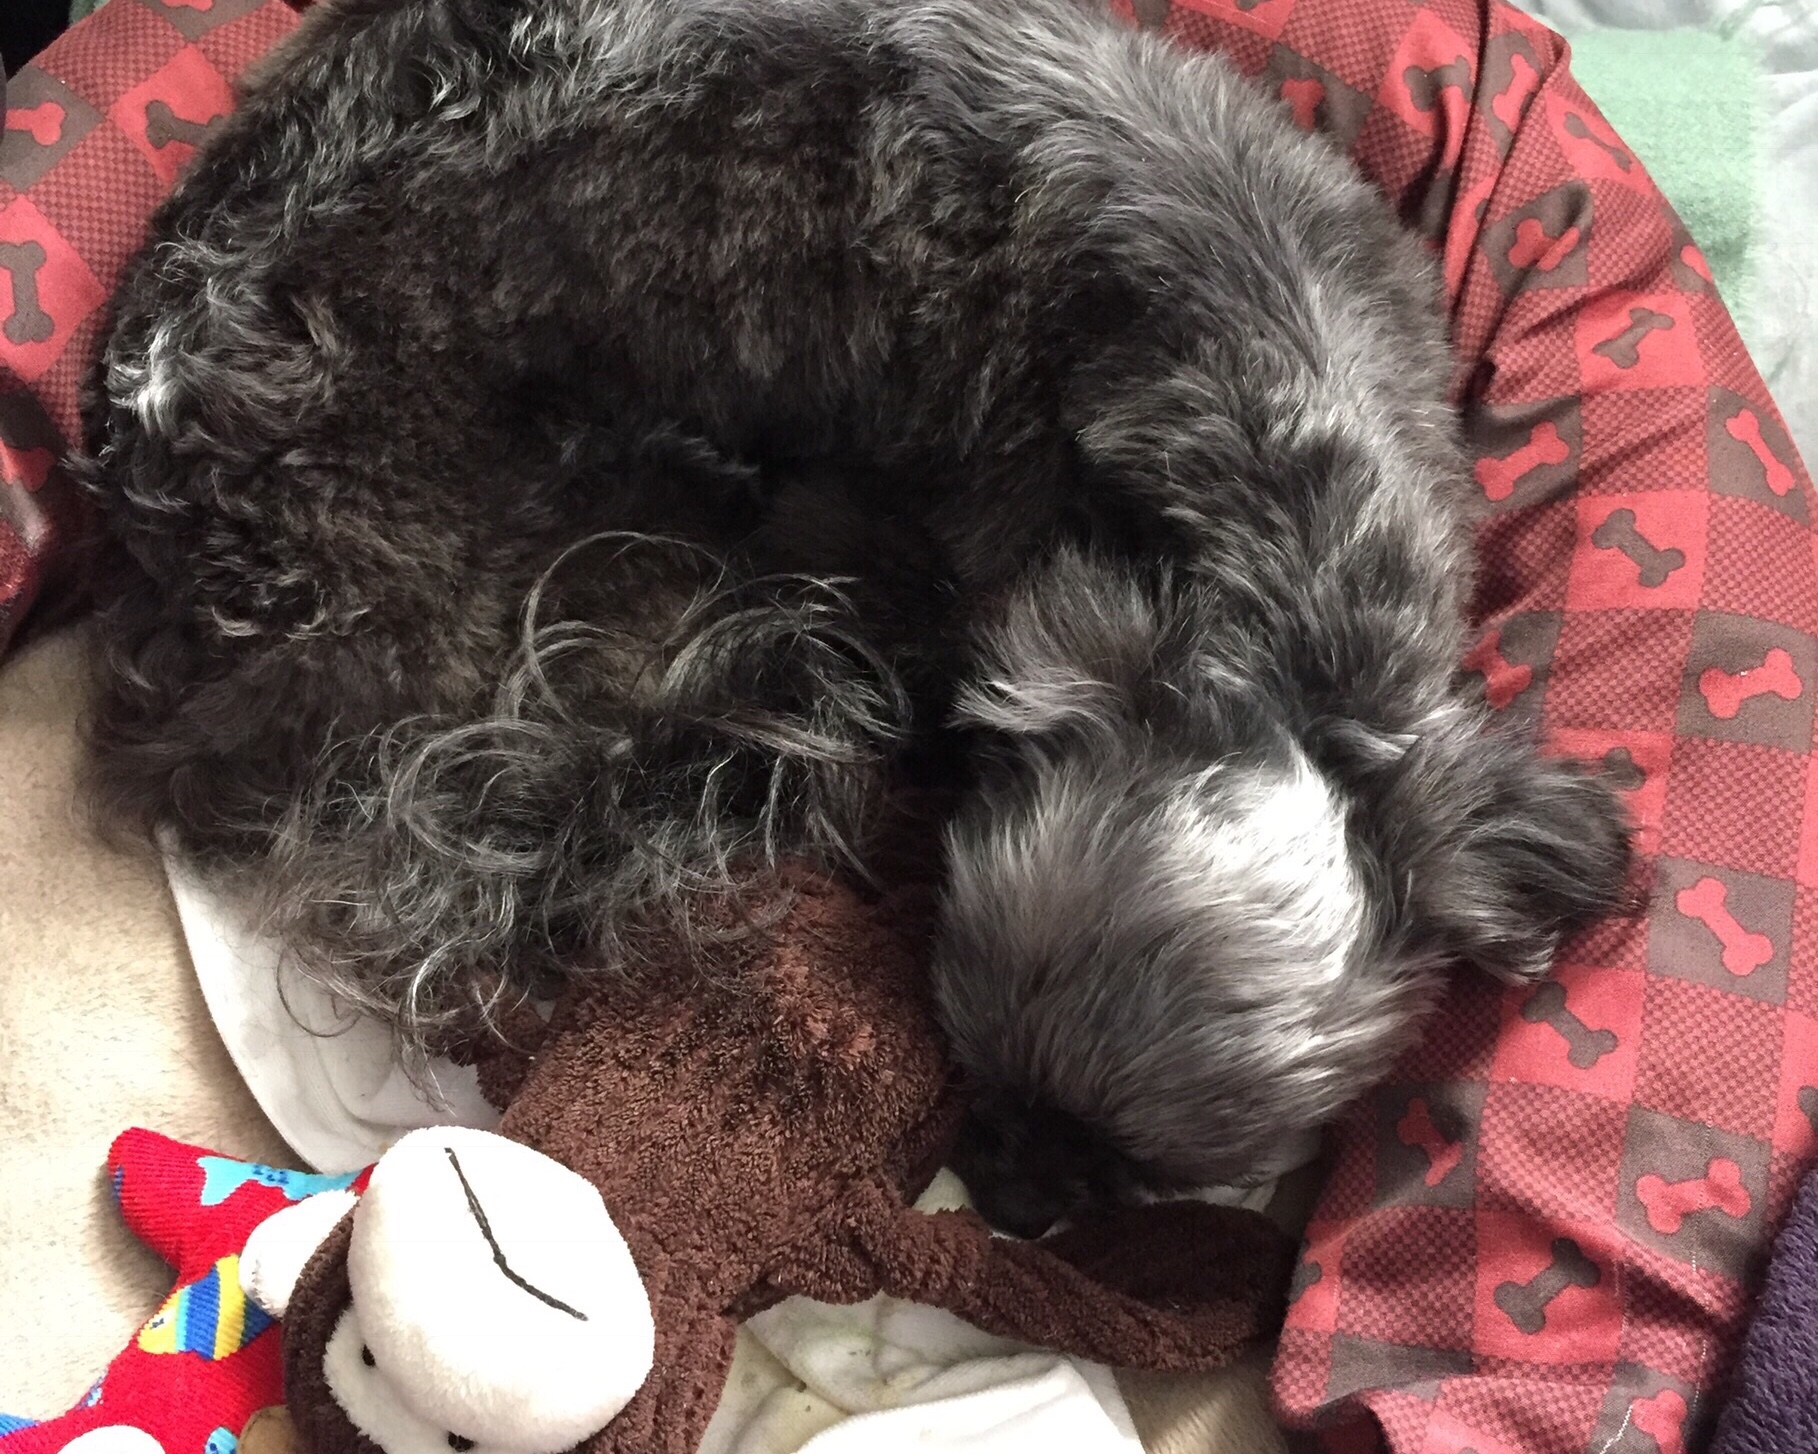 Small dog napping with his toys